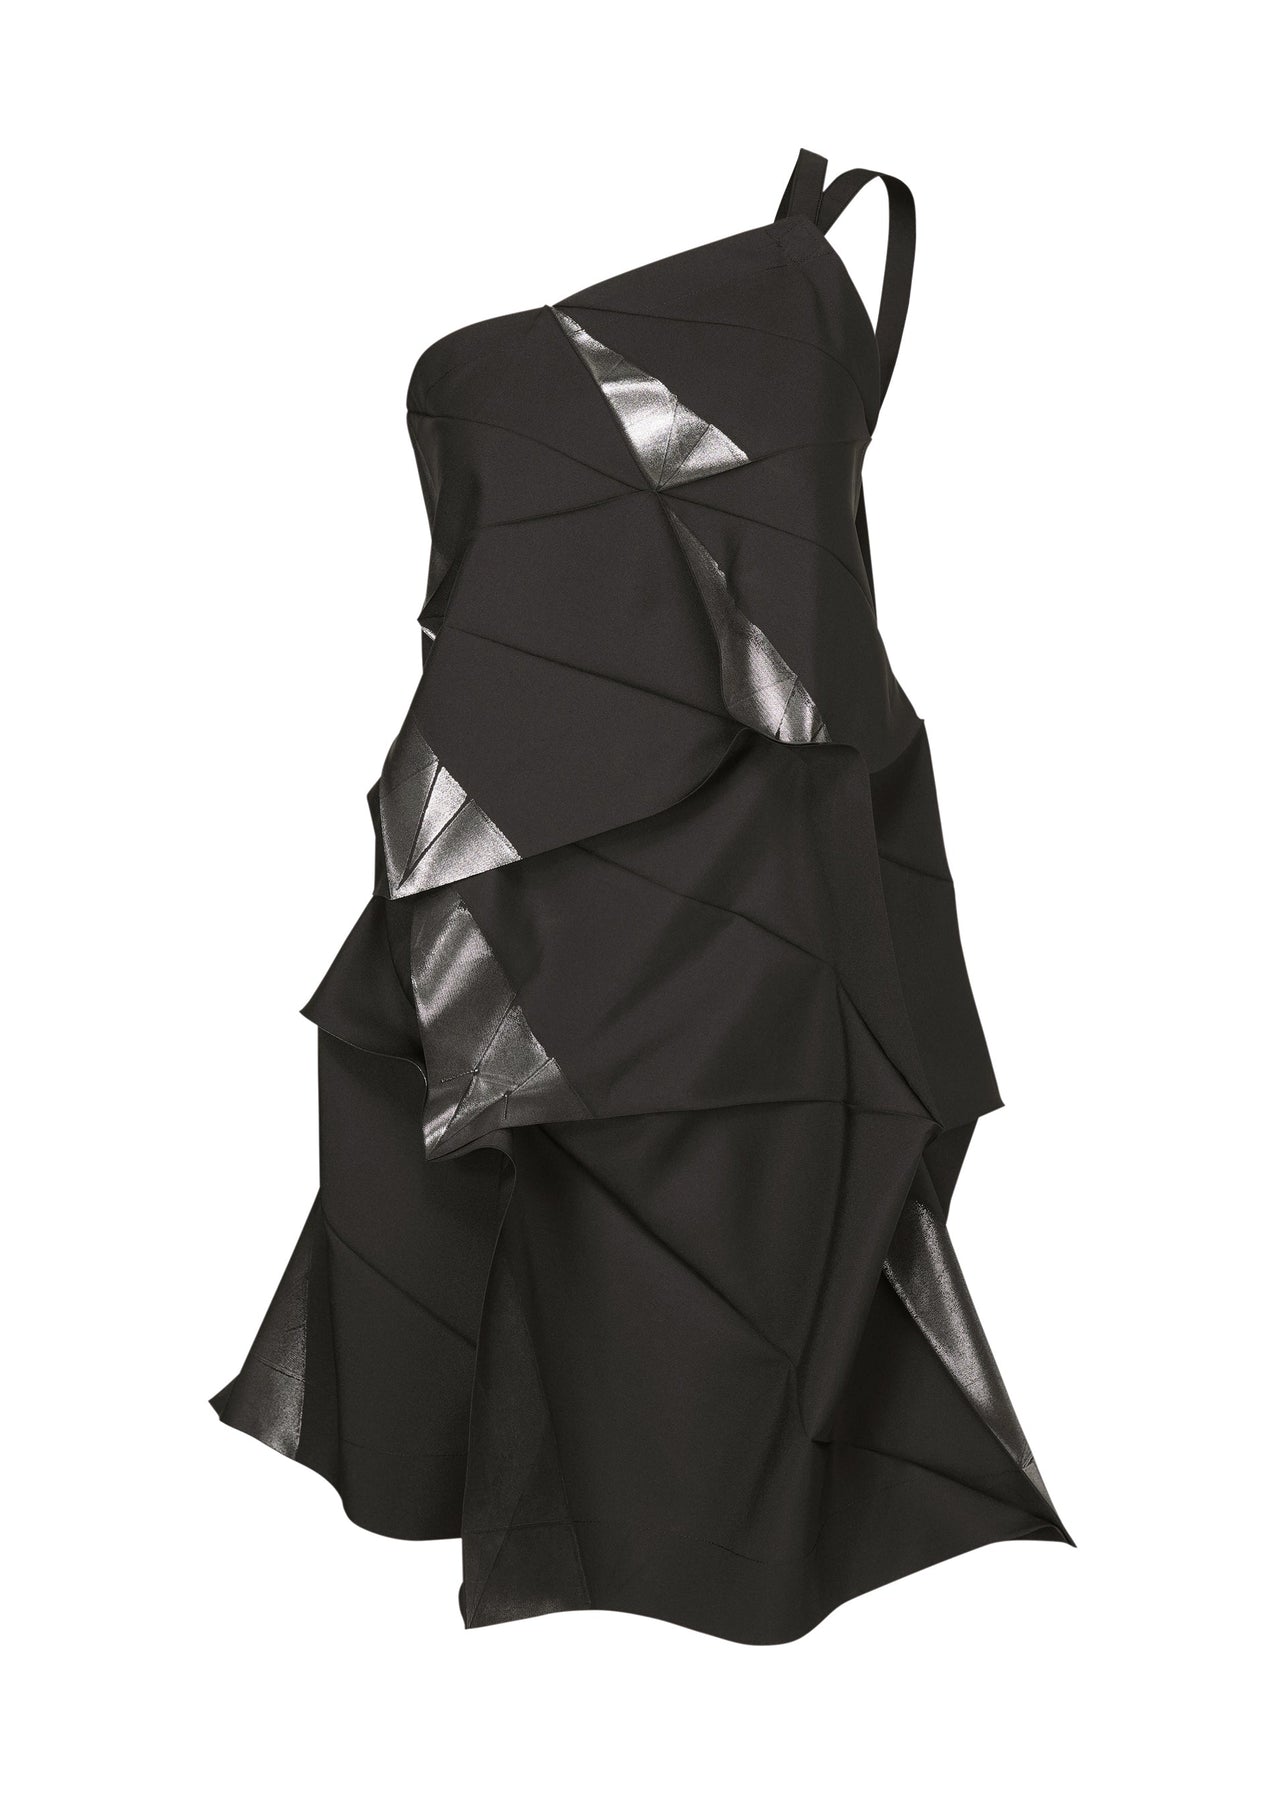 132 5. STANDARD DRESS | The official ISSEY MIYAKE ONLINE STORE 